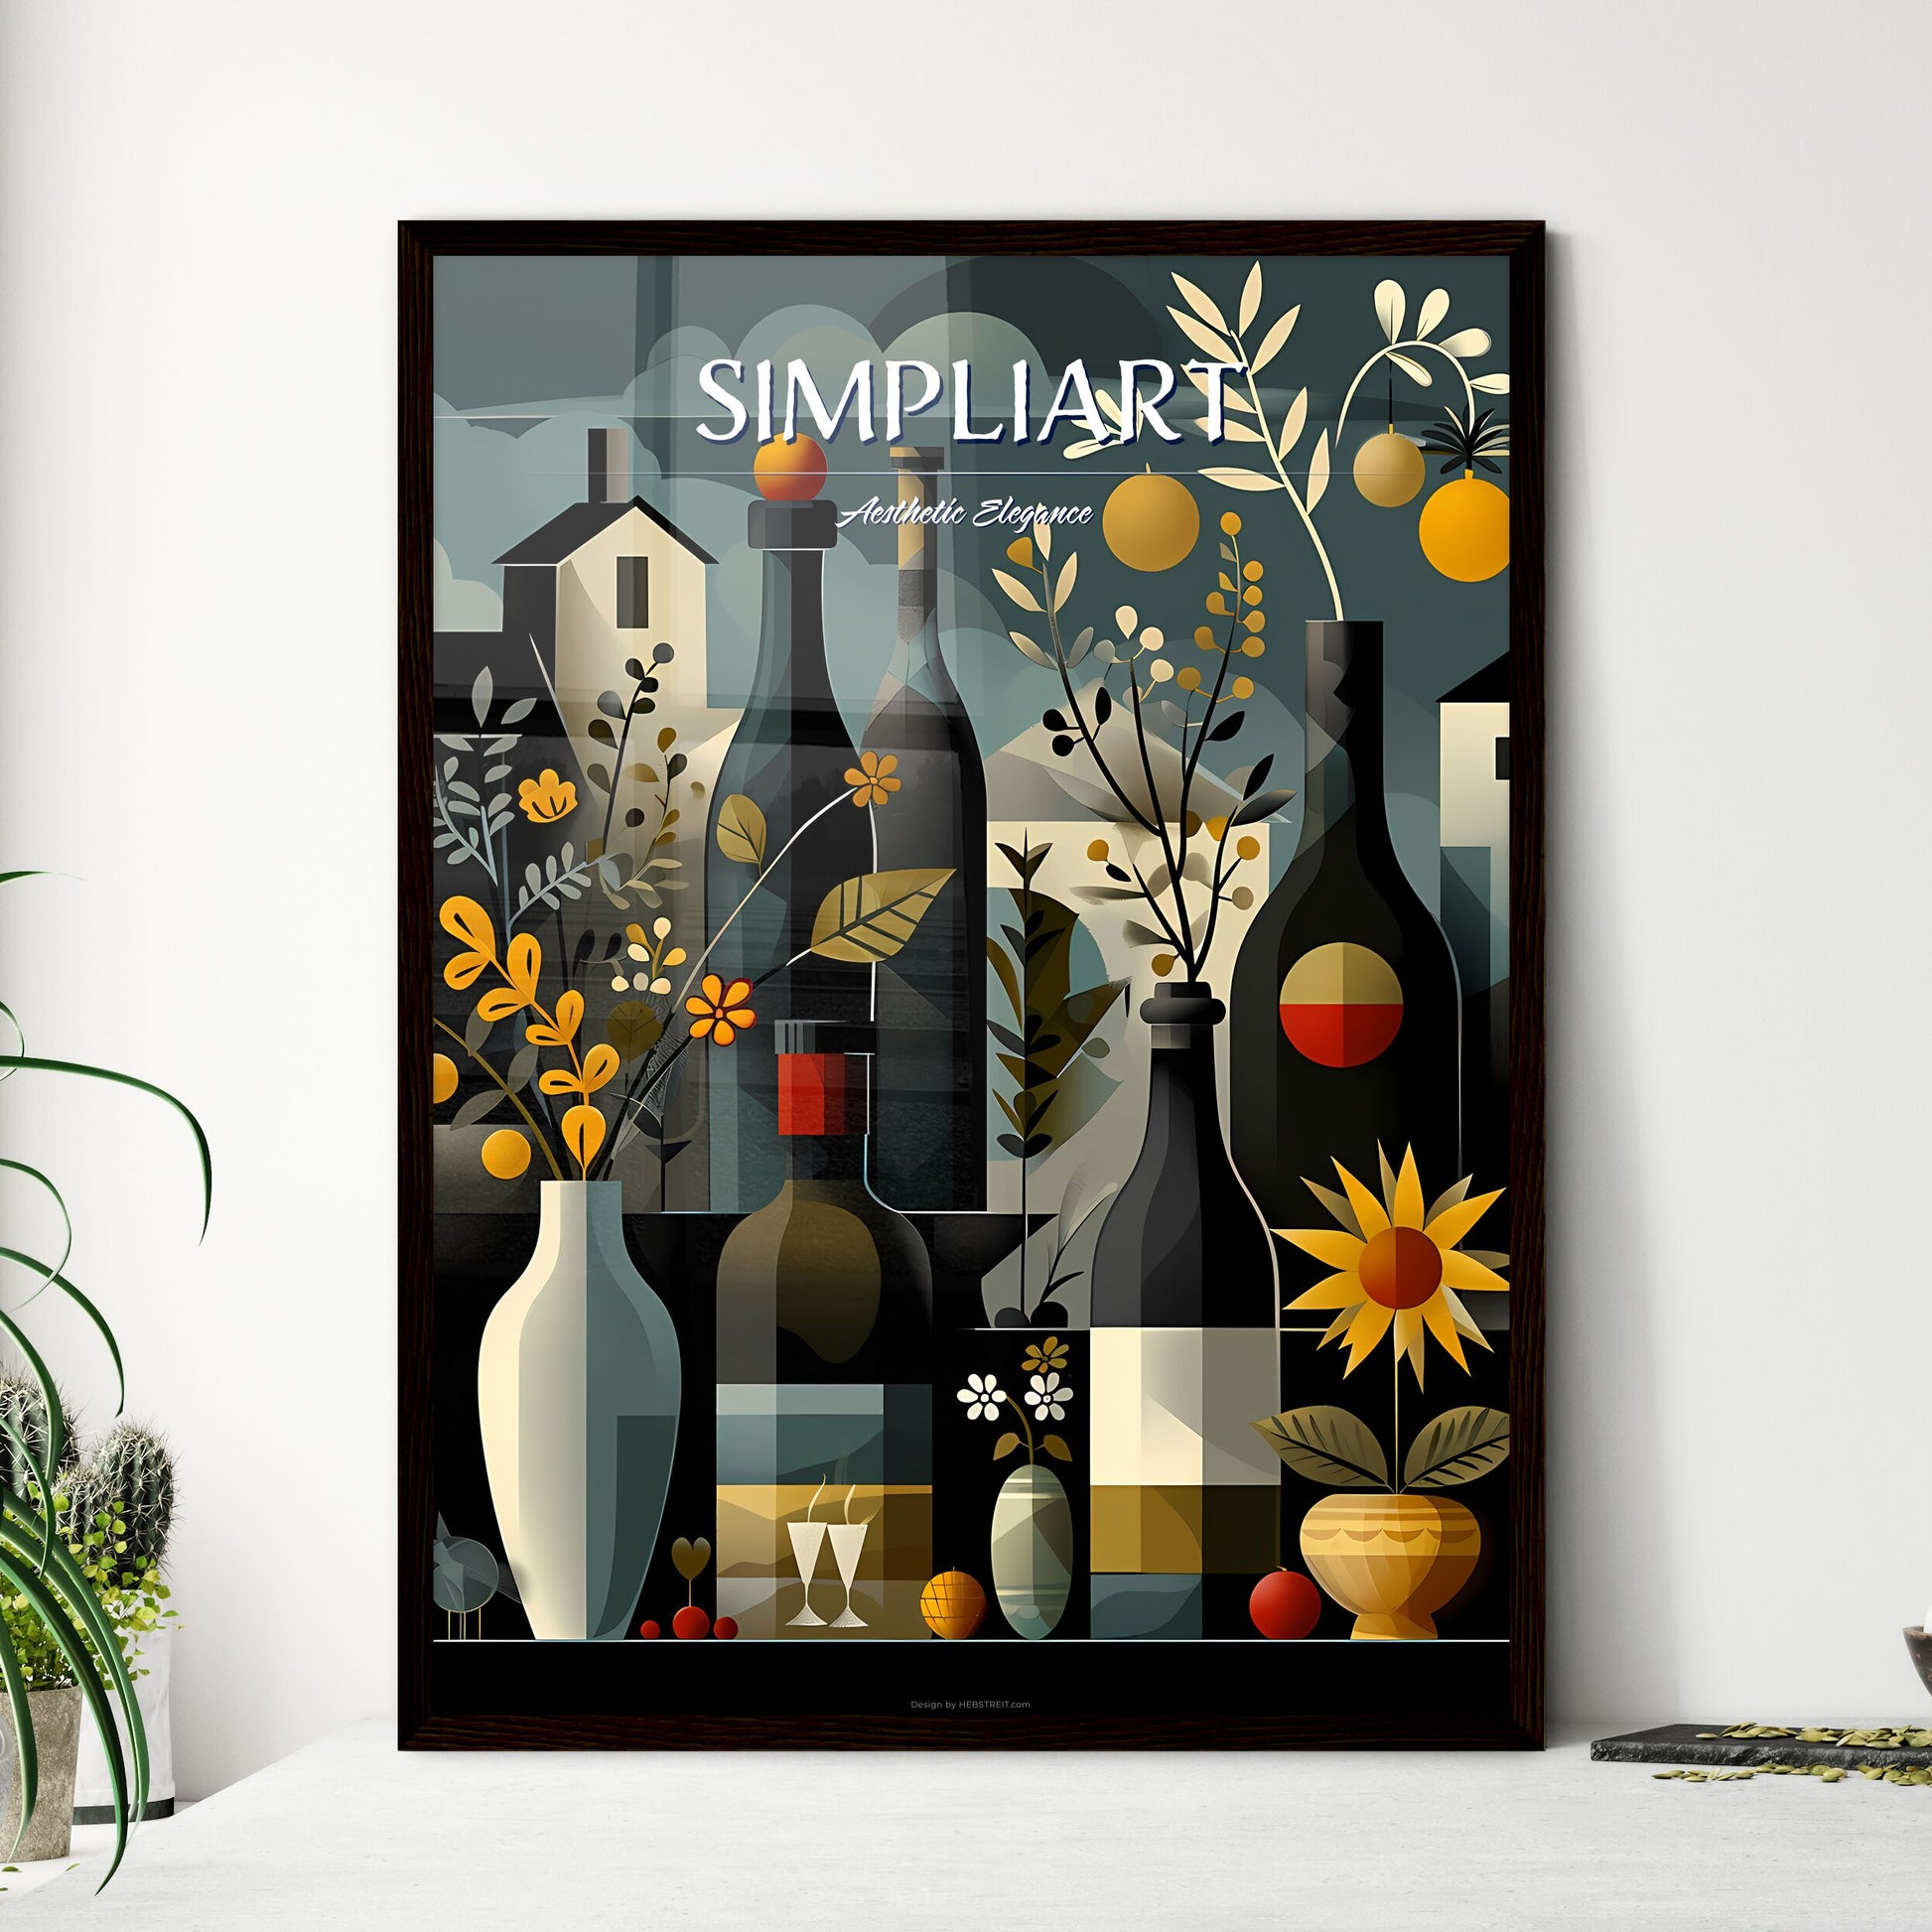 A Poster of art deco minimalism - A Group Of Bottles And Vases With Flowers Default Title